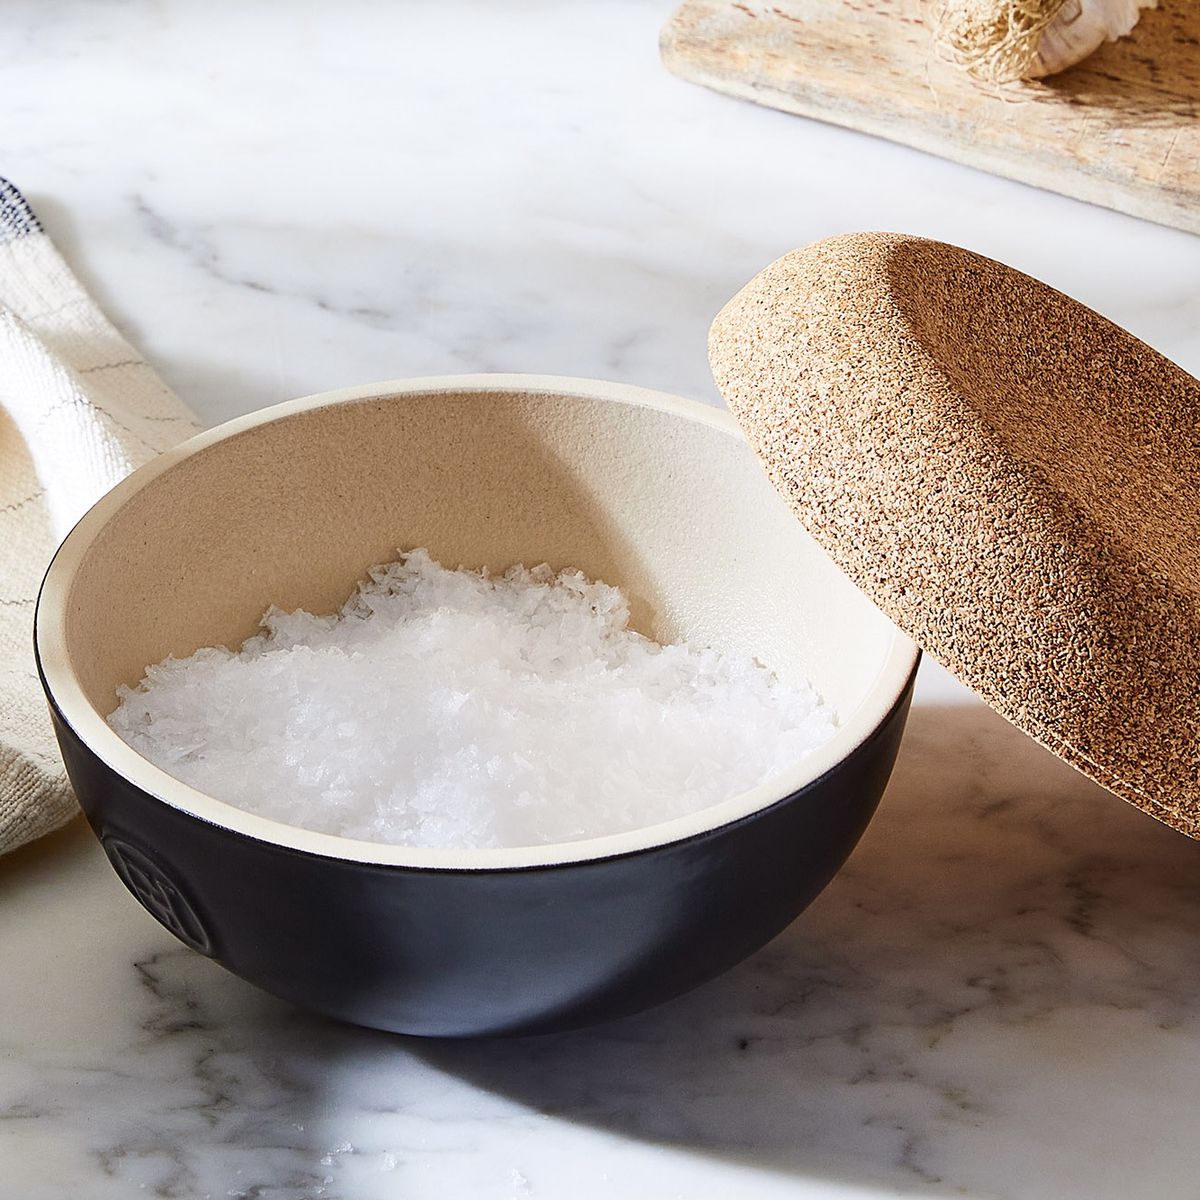 All About Salt: When to Use Kosher, Table, Sea Salt